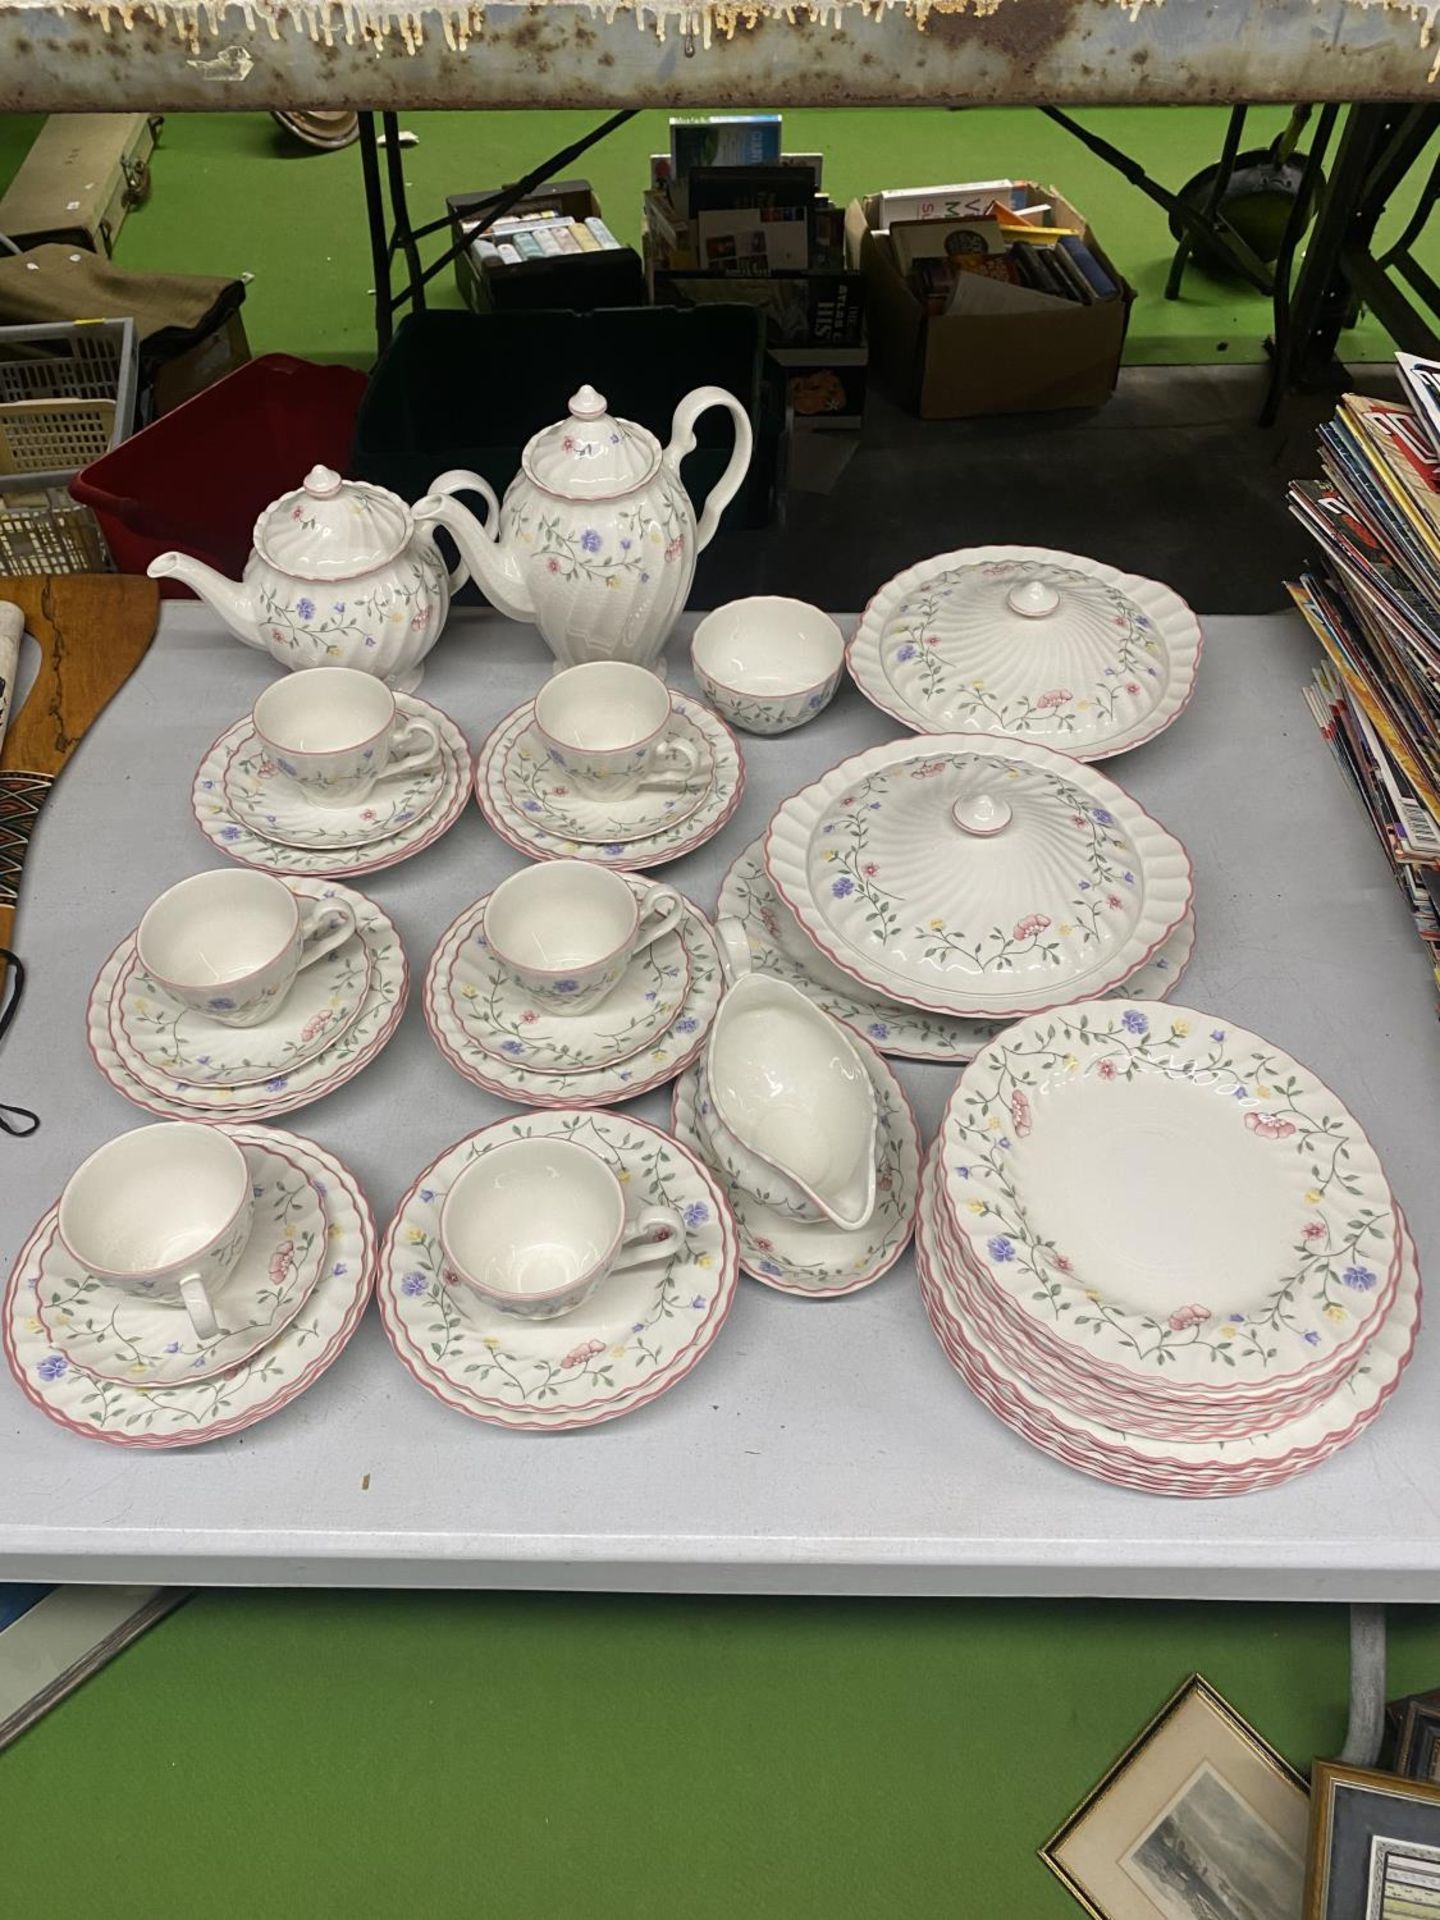 A NEAR COMPLETE JOHNSON BROS DINNER SERVICE INCLUDING DINNER AND SIDE PLATES, CUPS AND SAUCERS,